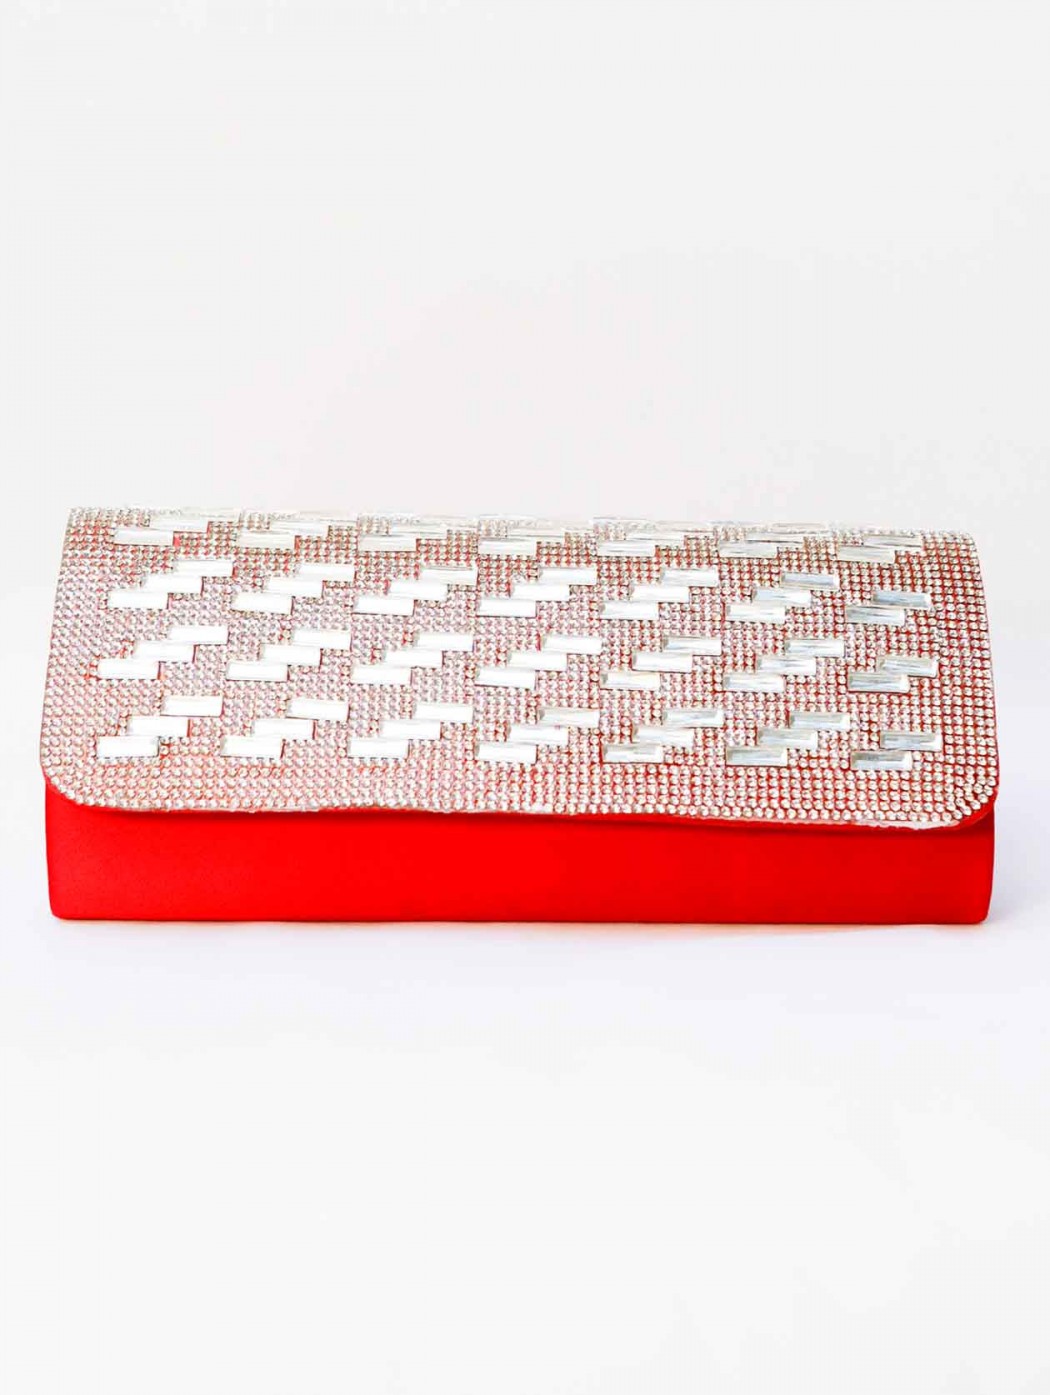 Anna Cecere bags | Red silk clutch evening bag with rhinestones